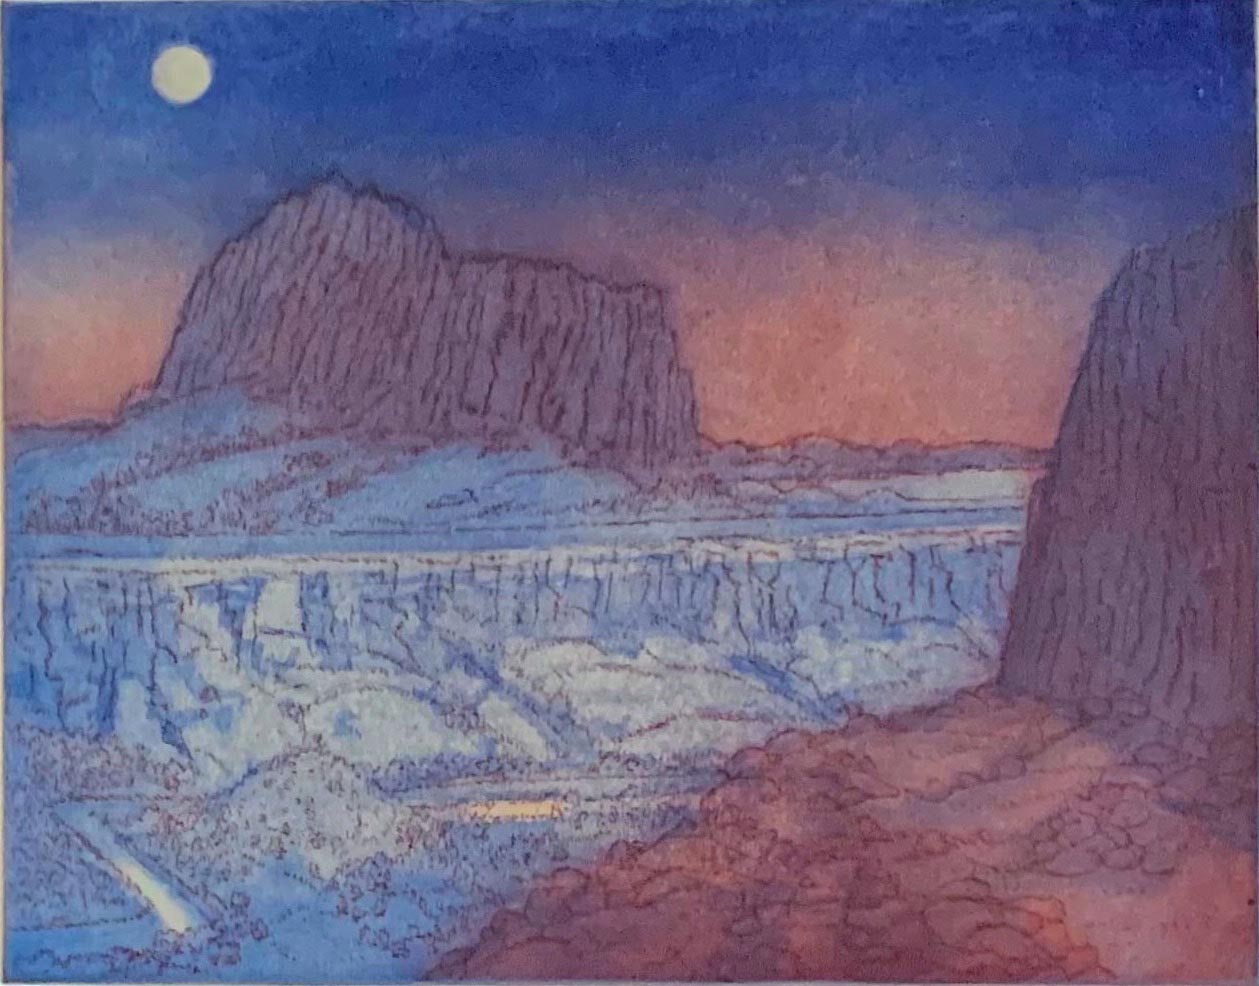 
							

									James McElhinney									Desert Nocturne 									etching with aquatint on paper<br />
7 x 9 inches									


							